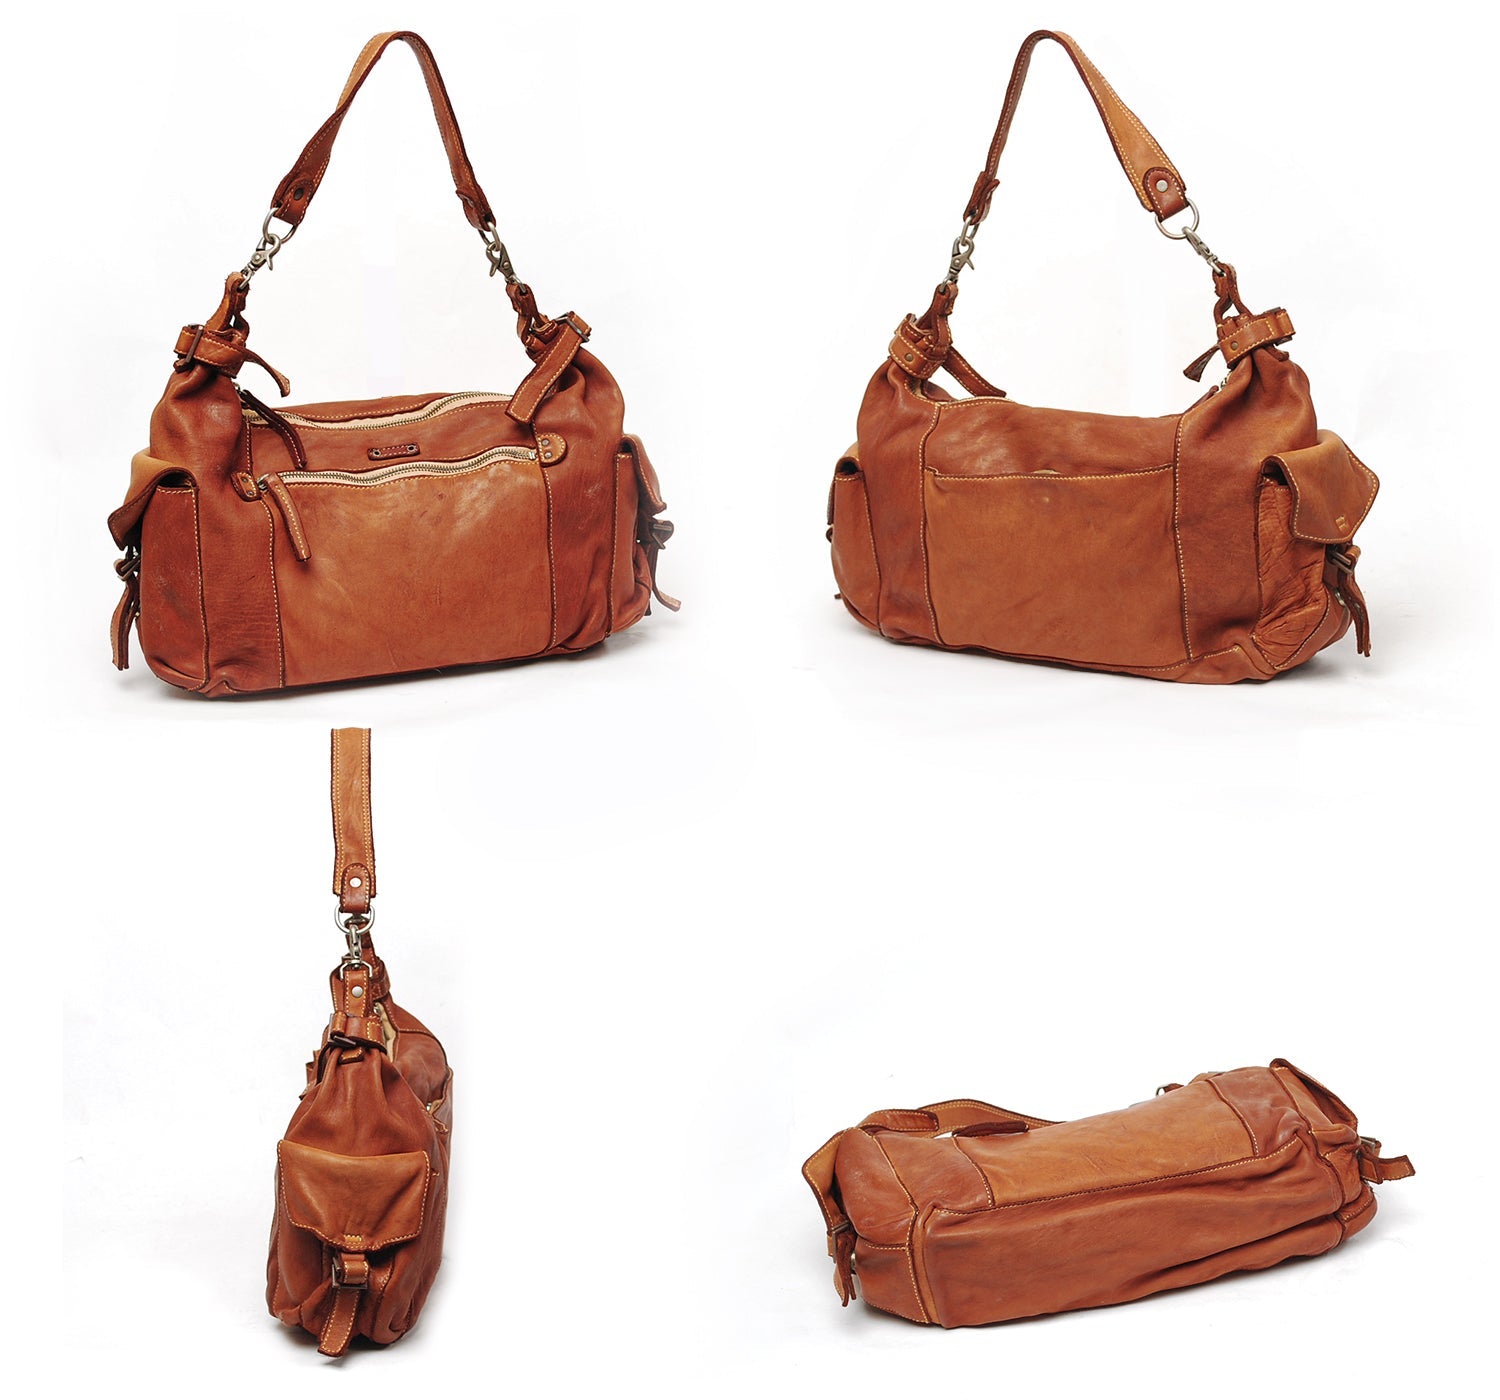 REALMIND / FORO A unique texture. A 2-way bag made of soft and light high-quality horse-tanned leather.